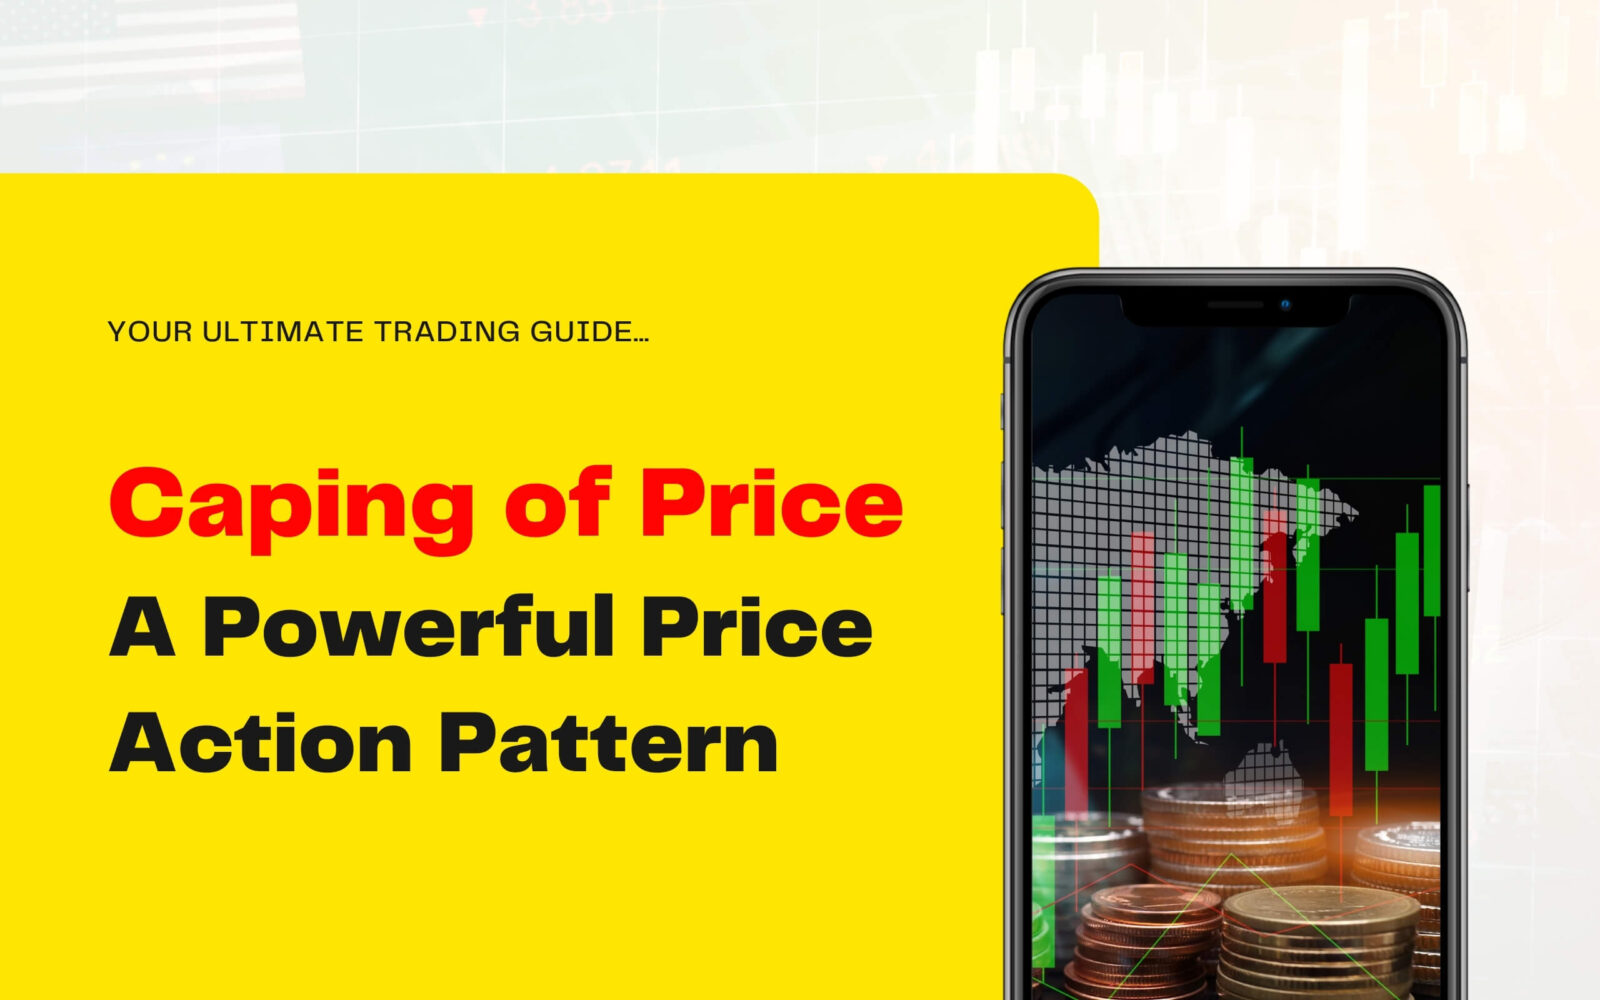 Caping of Price – A Powerful Price Action Pattern 2022